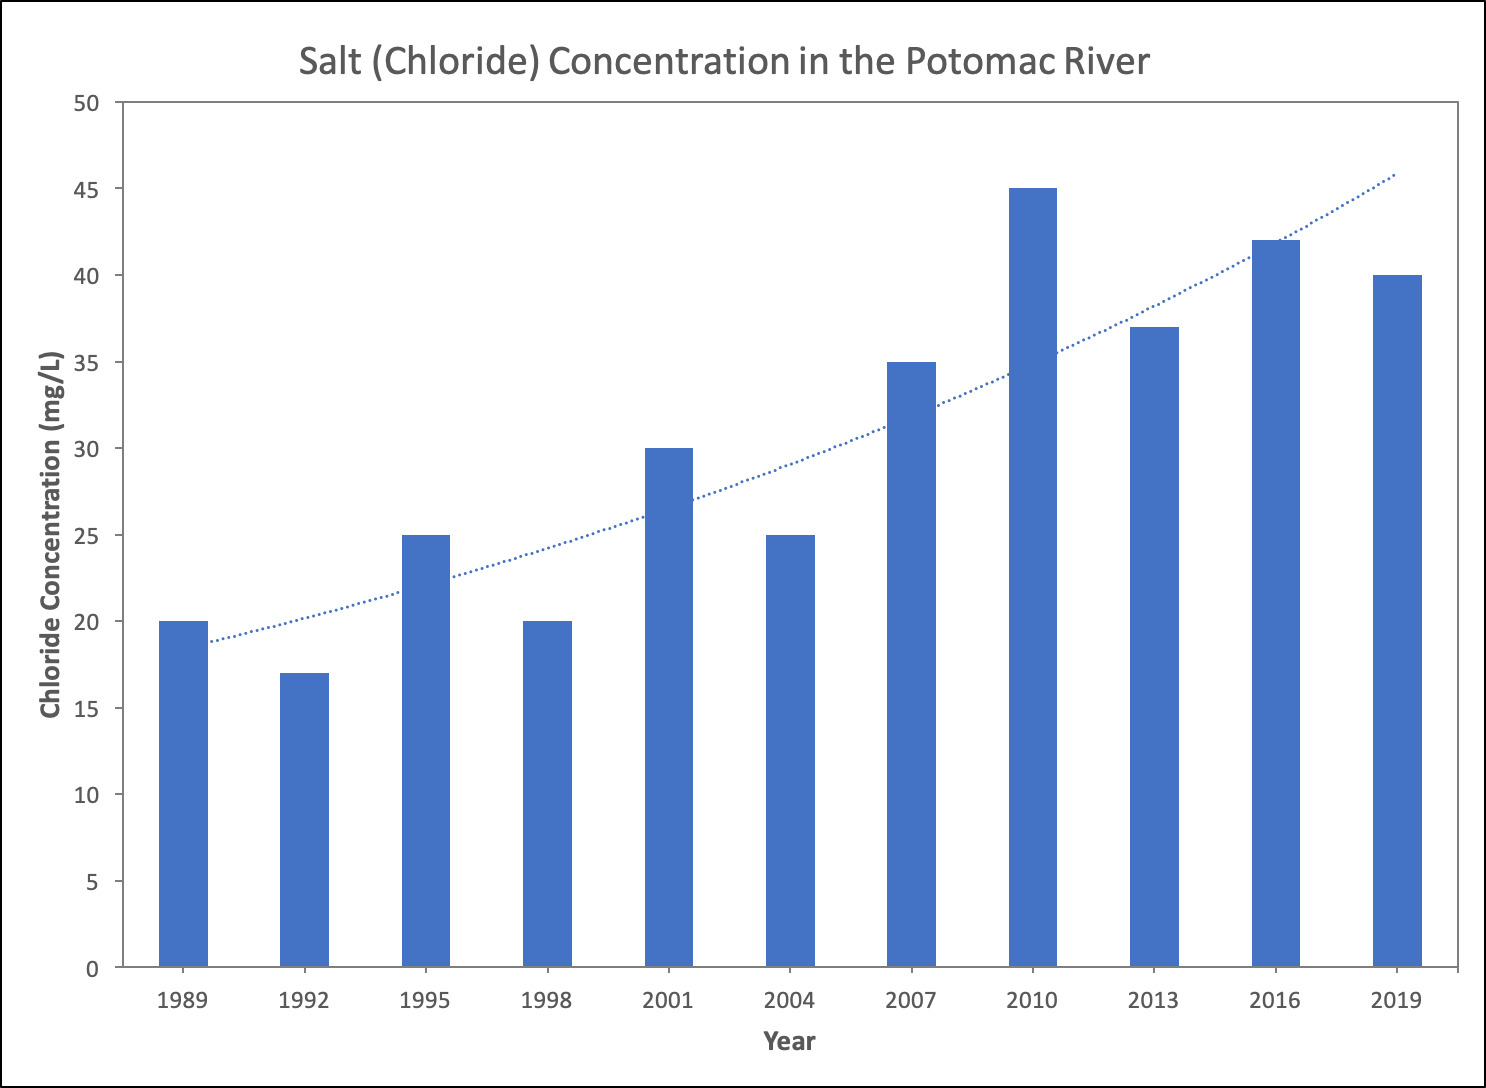 Chloride concentrations over time increasing in Potomac River